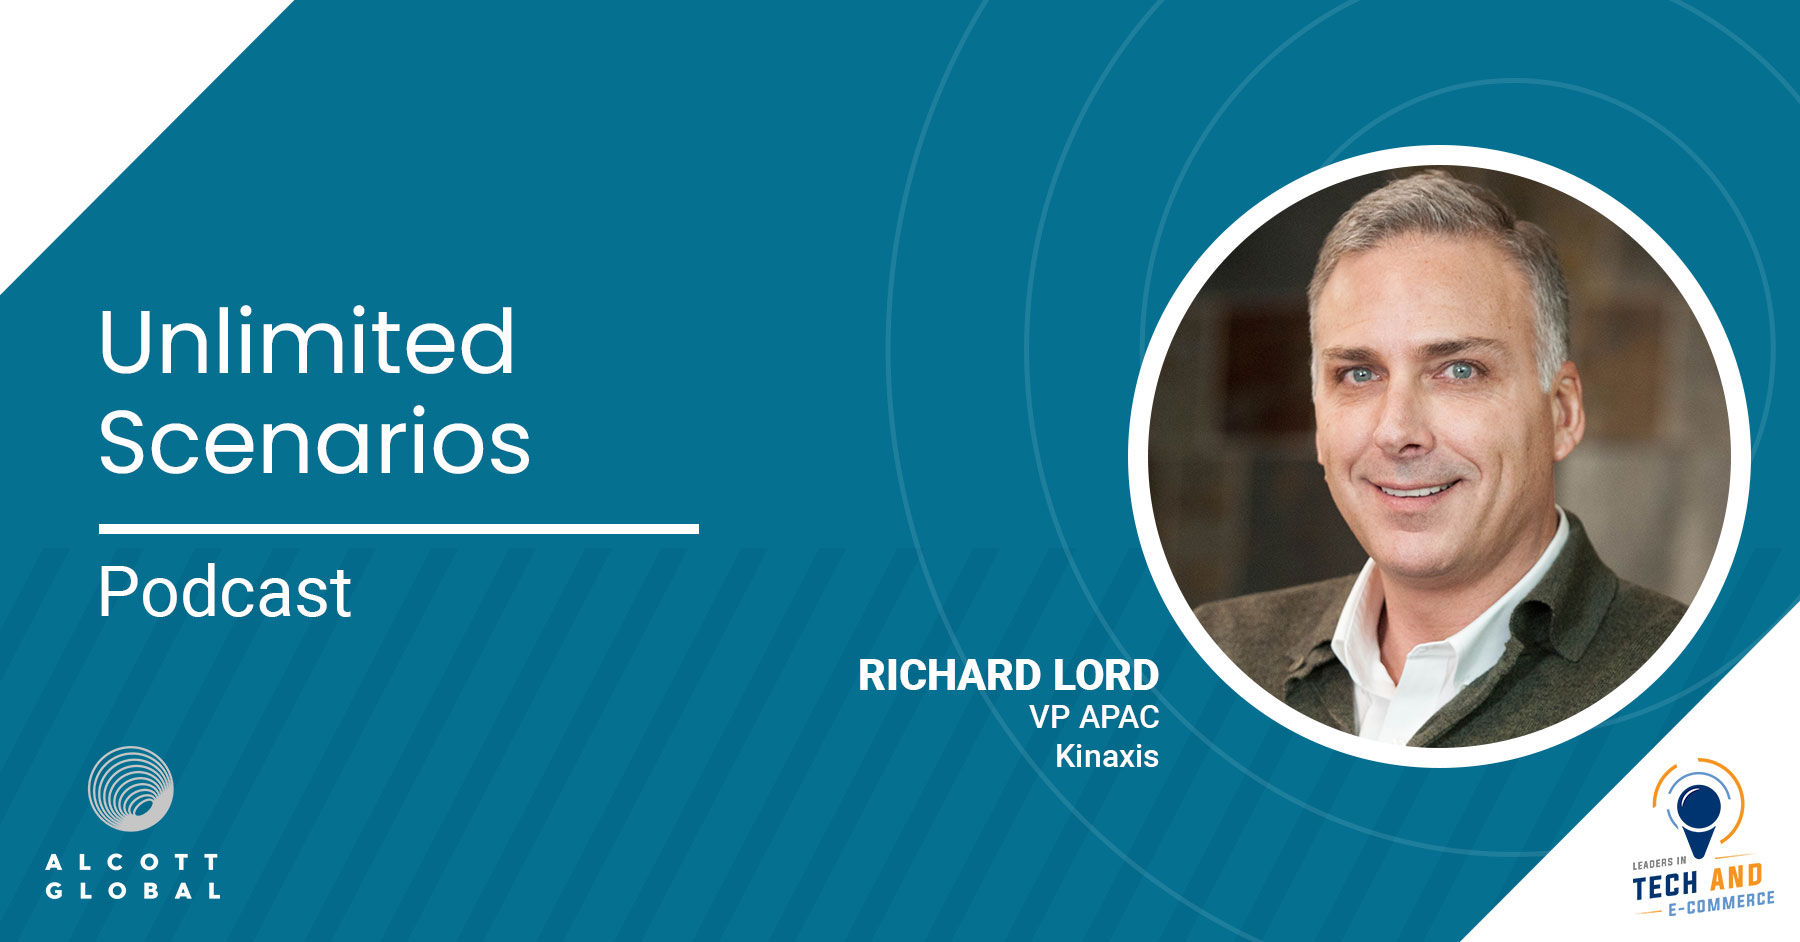 Unlimited Scenarios with Richard Lord VP APAC of Kinaxis Featured Image